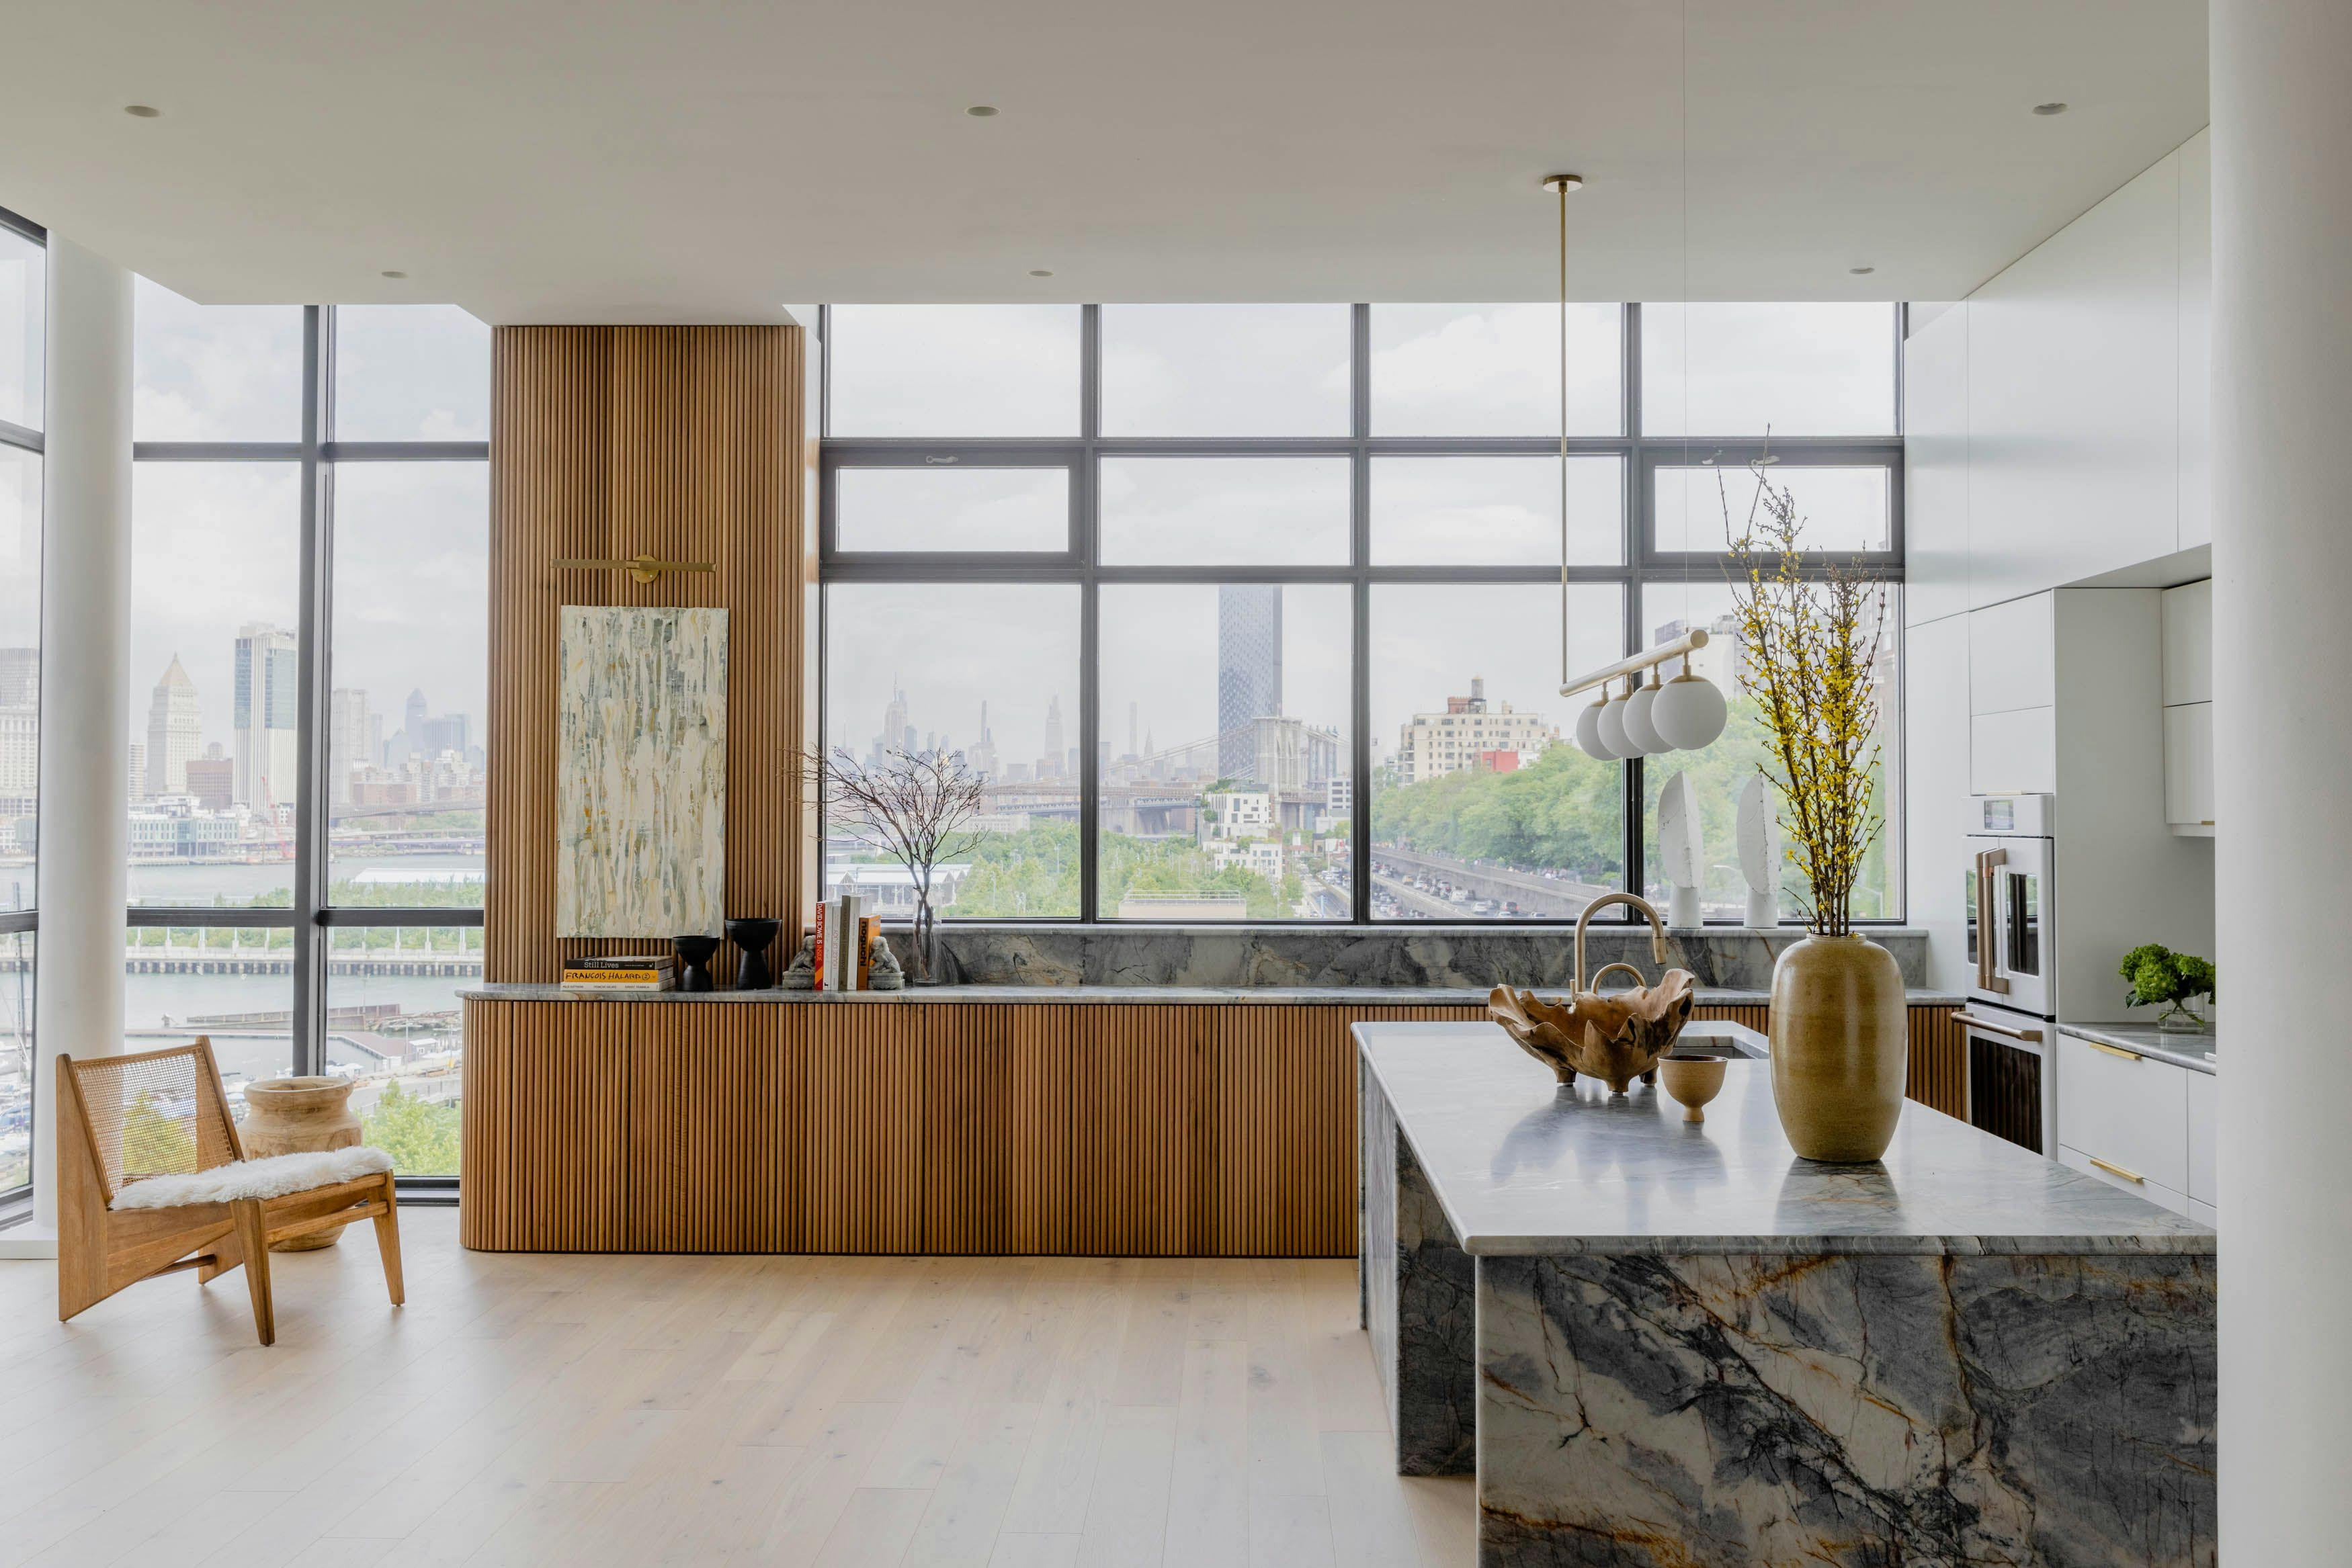 A city view and contemporary style with minimalistic design, cozy wooden elements, and a visually impressive kitchen island.